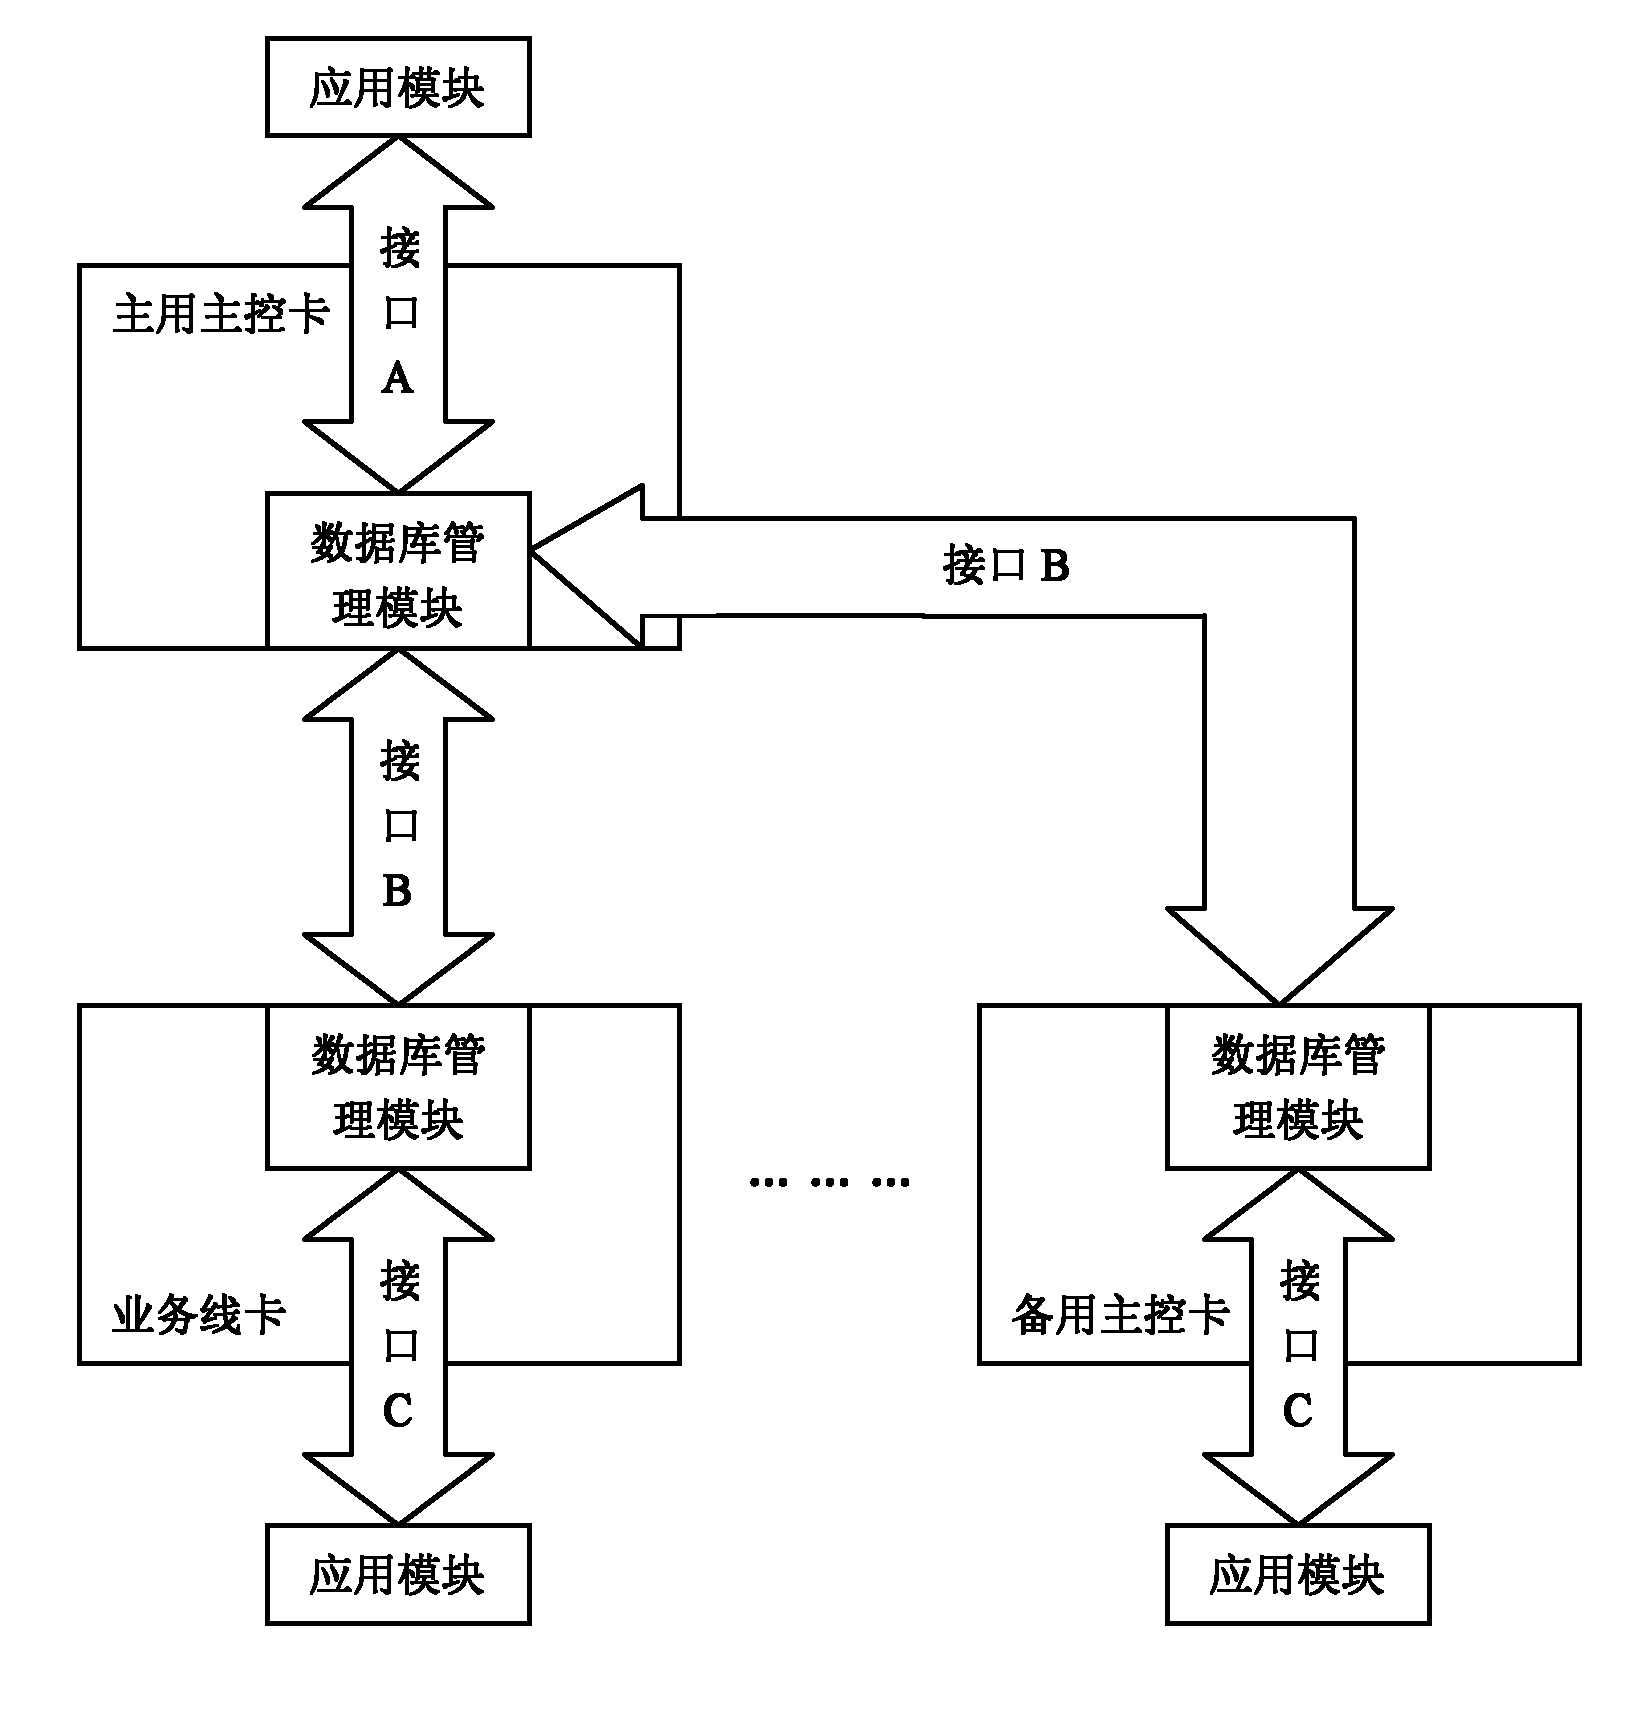 Data operation method for distributed database in embedded system and board card